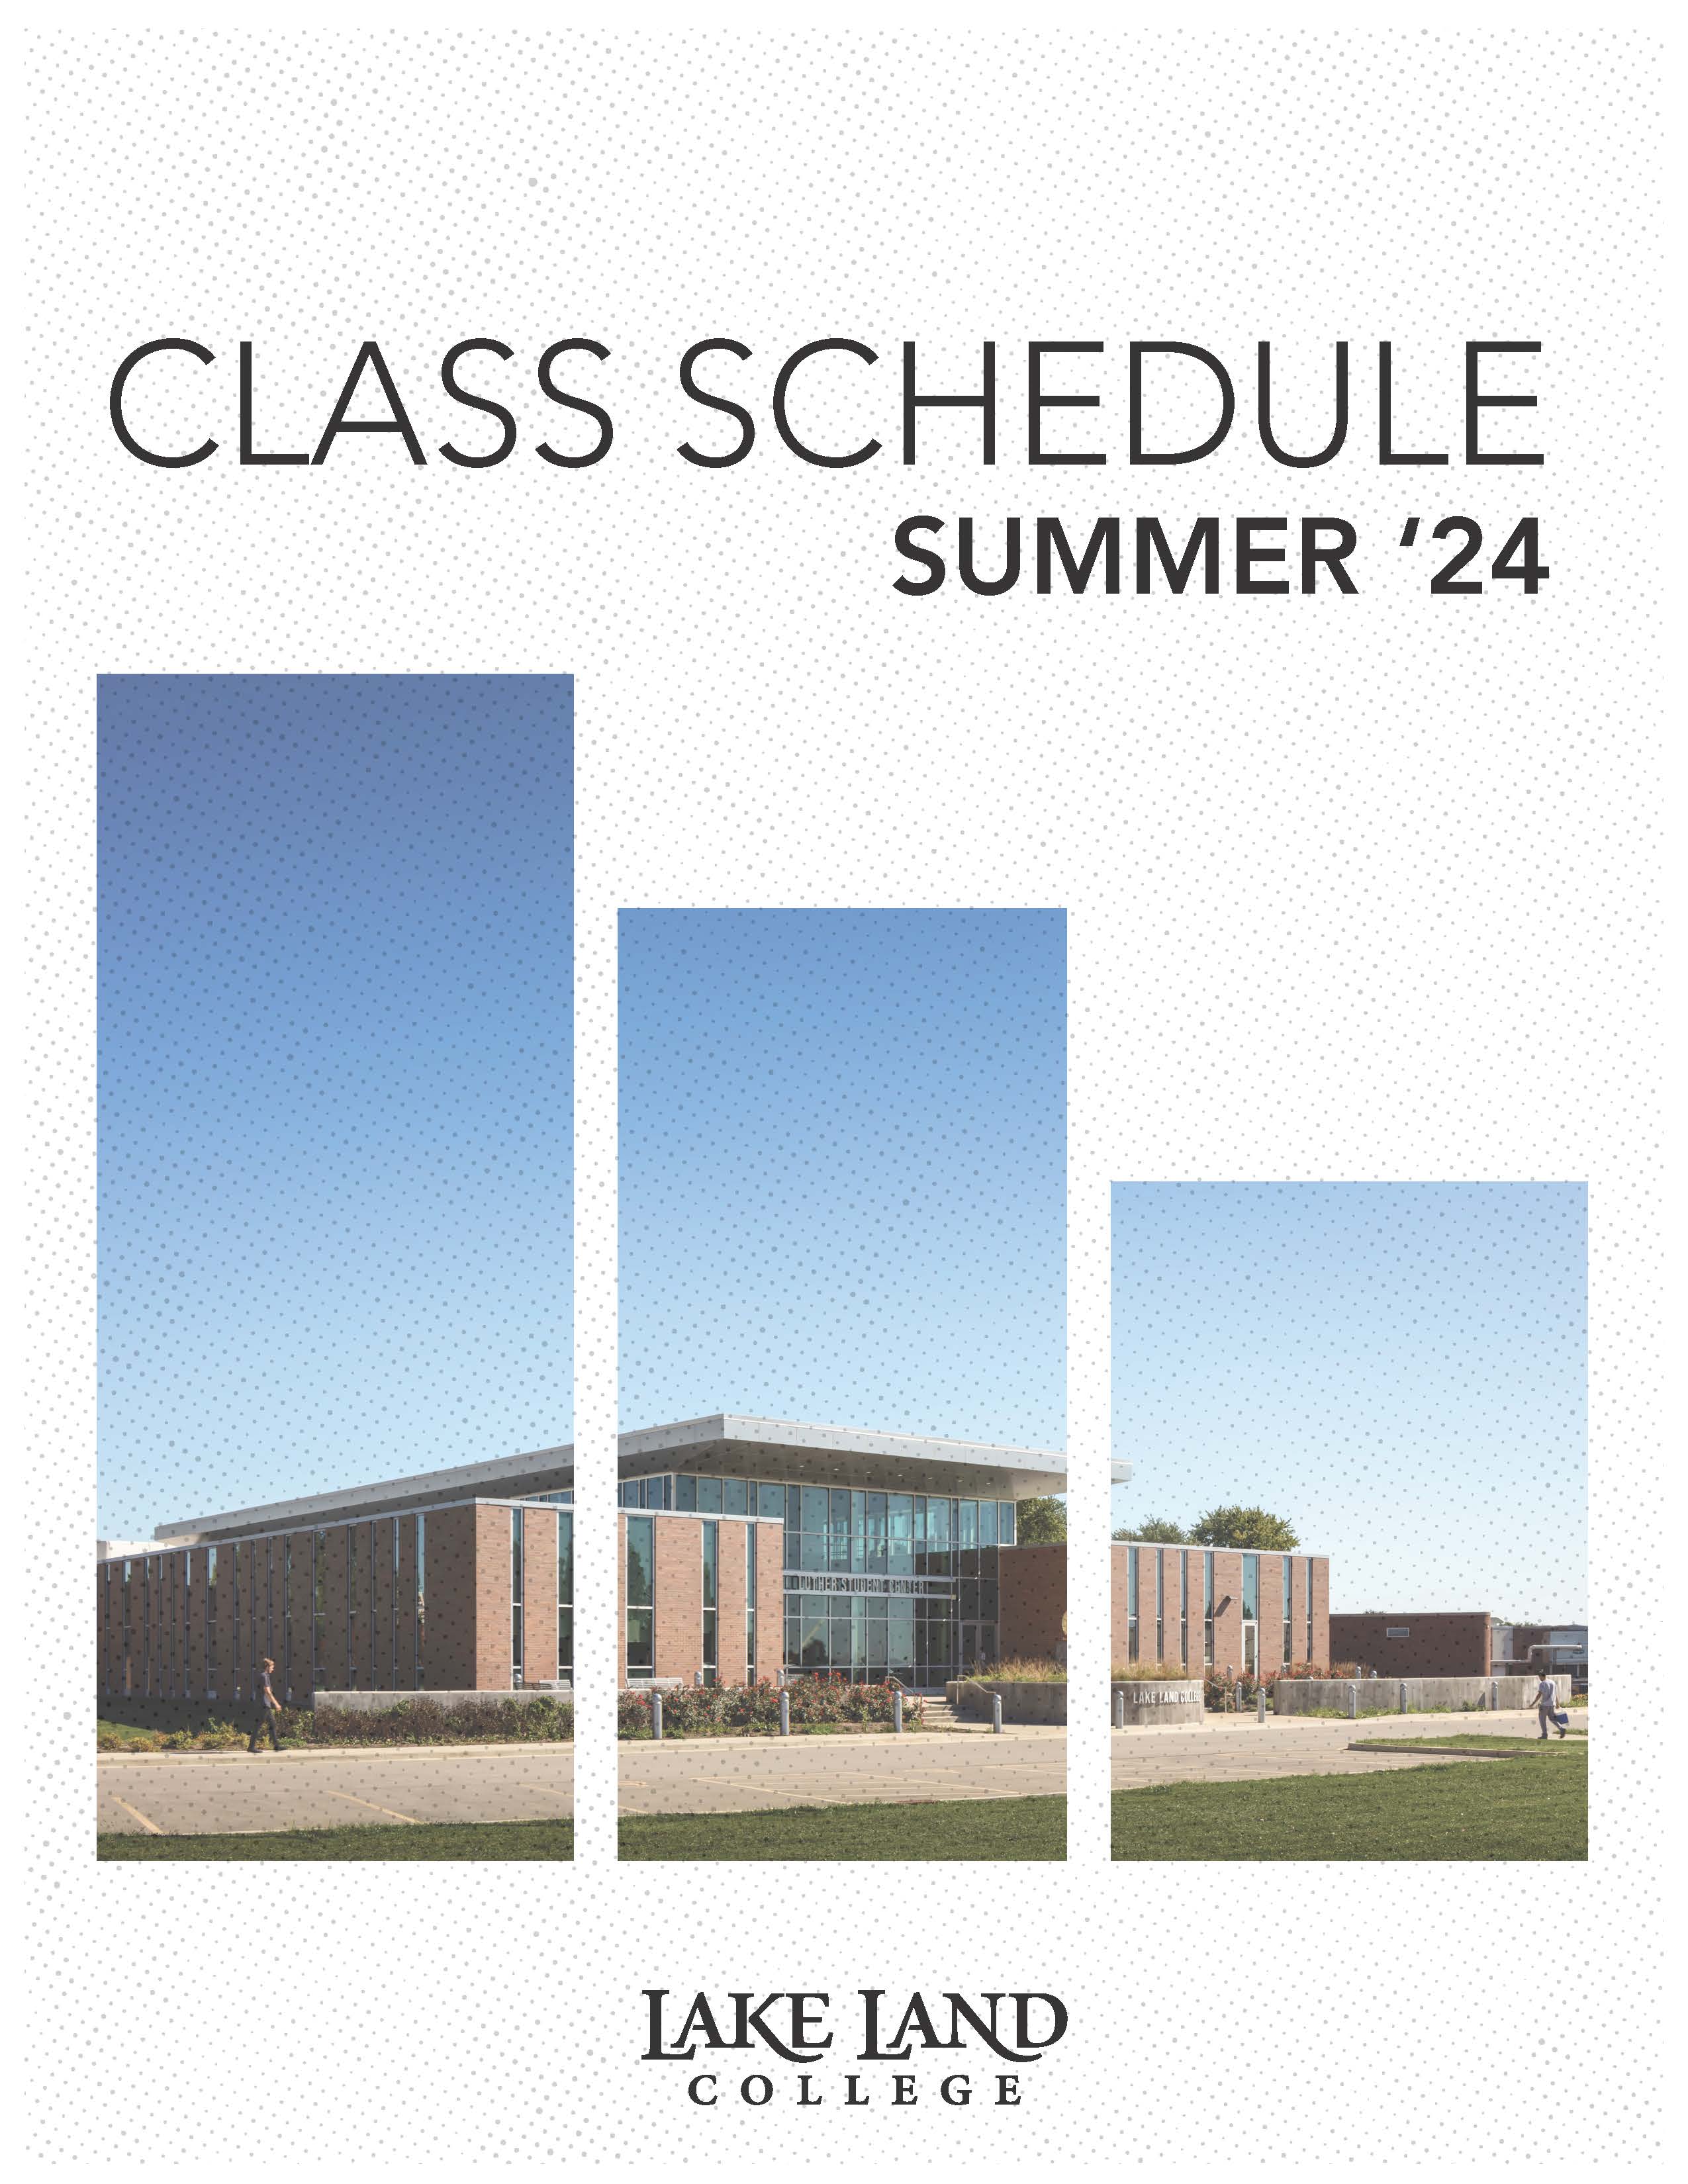 Summer schedule cover page